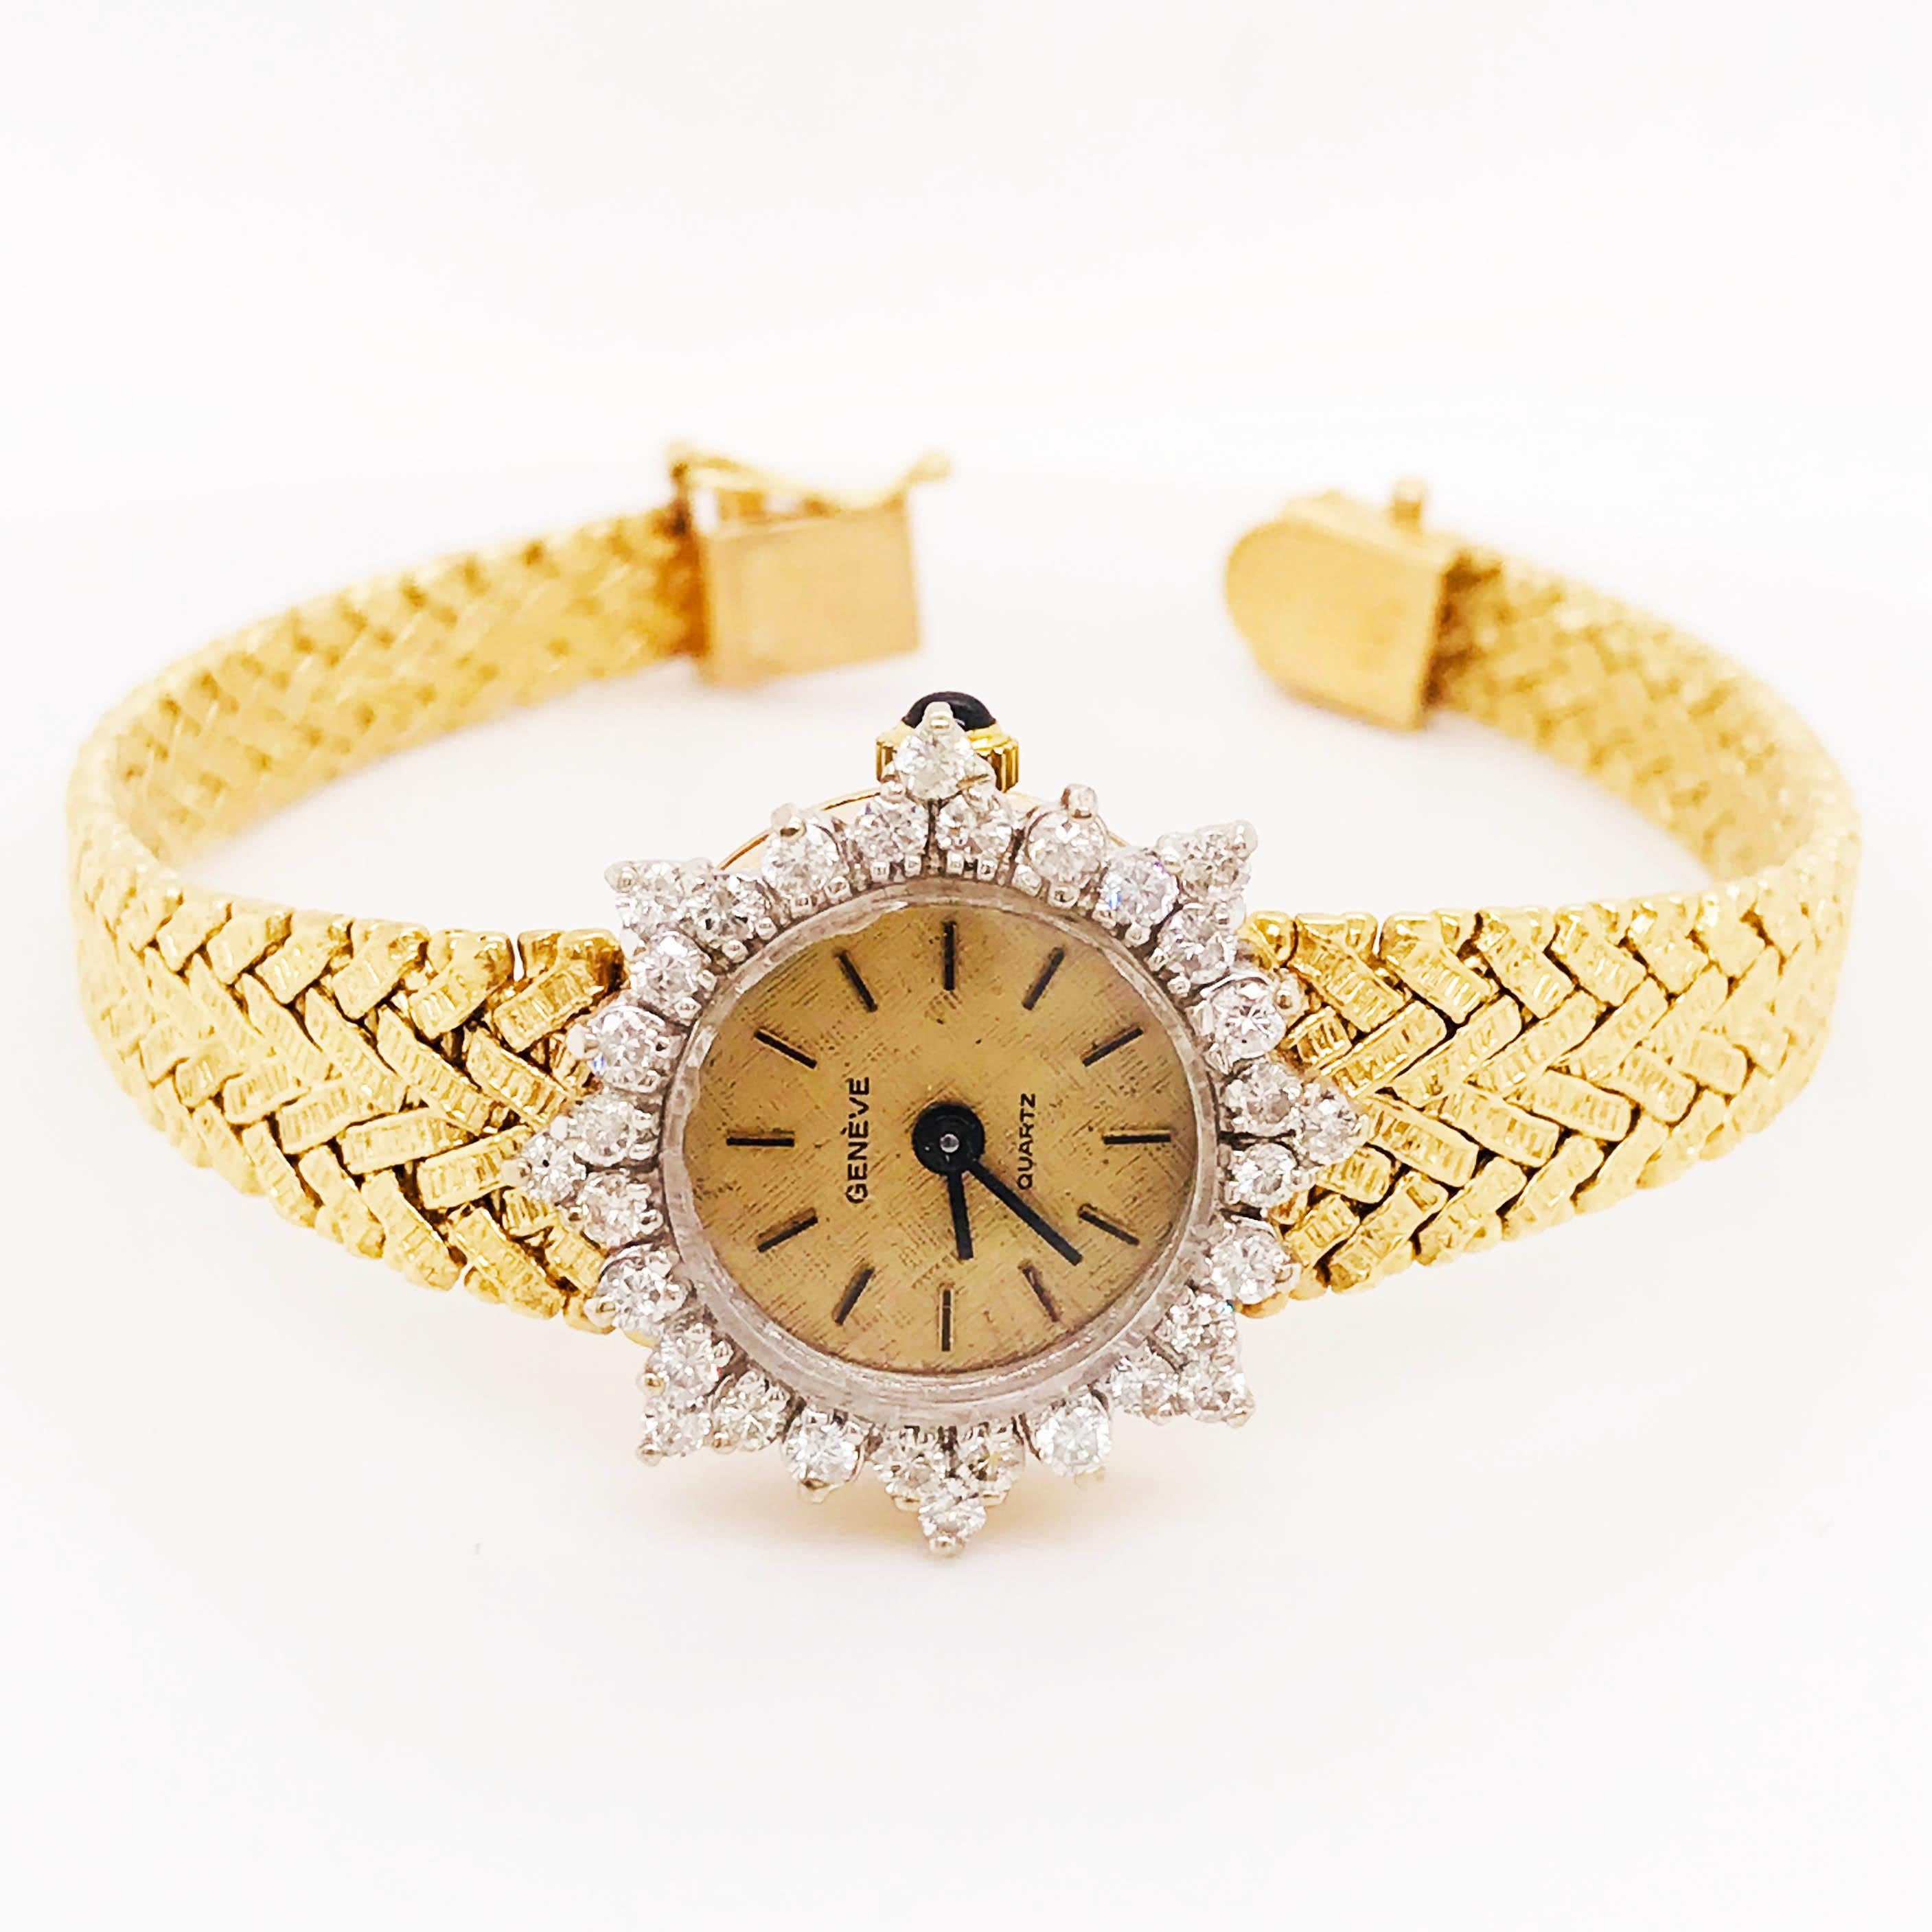 This is an original, authentic Geneve quartz 14K yellow gold watch - Ladies model with 1.50 carats of total diamond weight! This is a luxury Swiss watch with a quartz movement! This watch has the original face, a beautiful champagne-colored dial